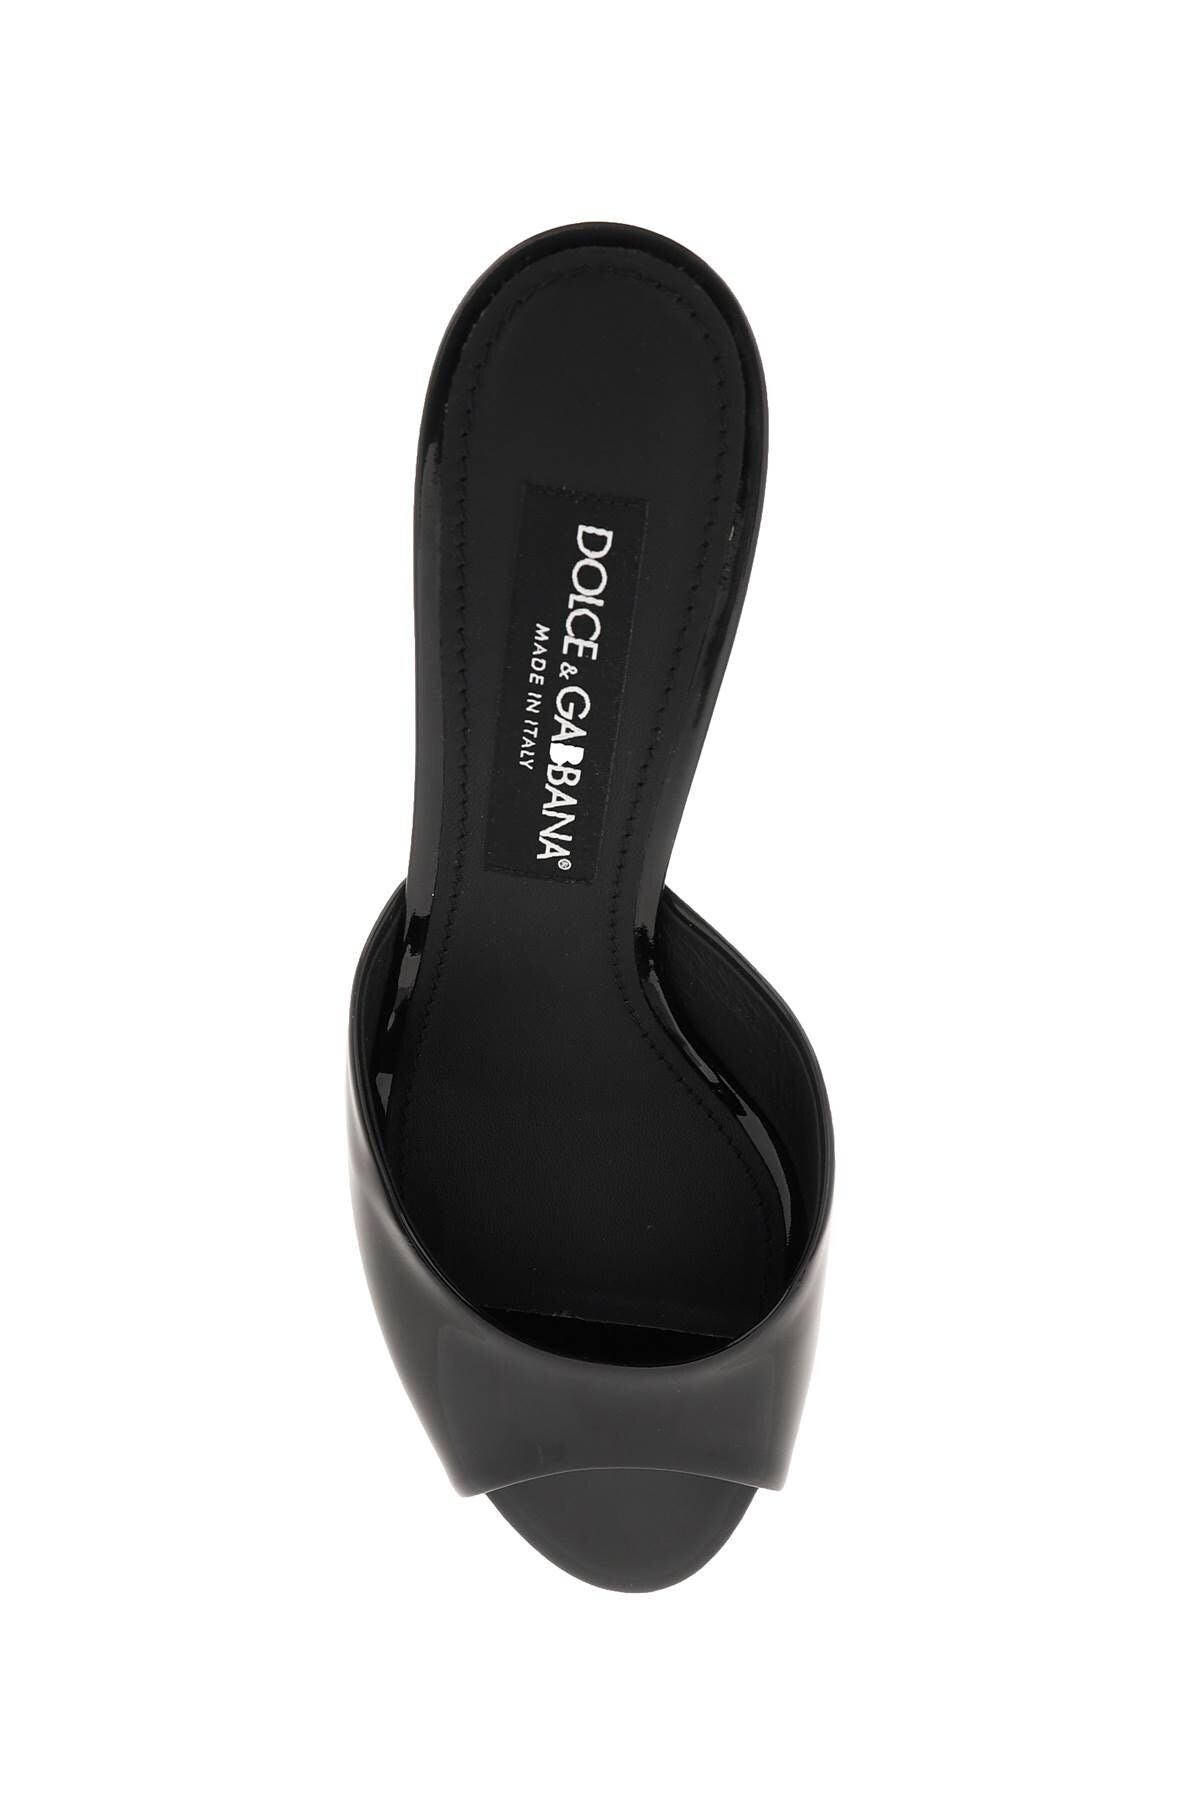 Dolce & Gabbana Patent Leather Mules in Black | Lyst